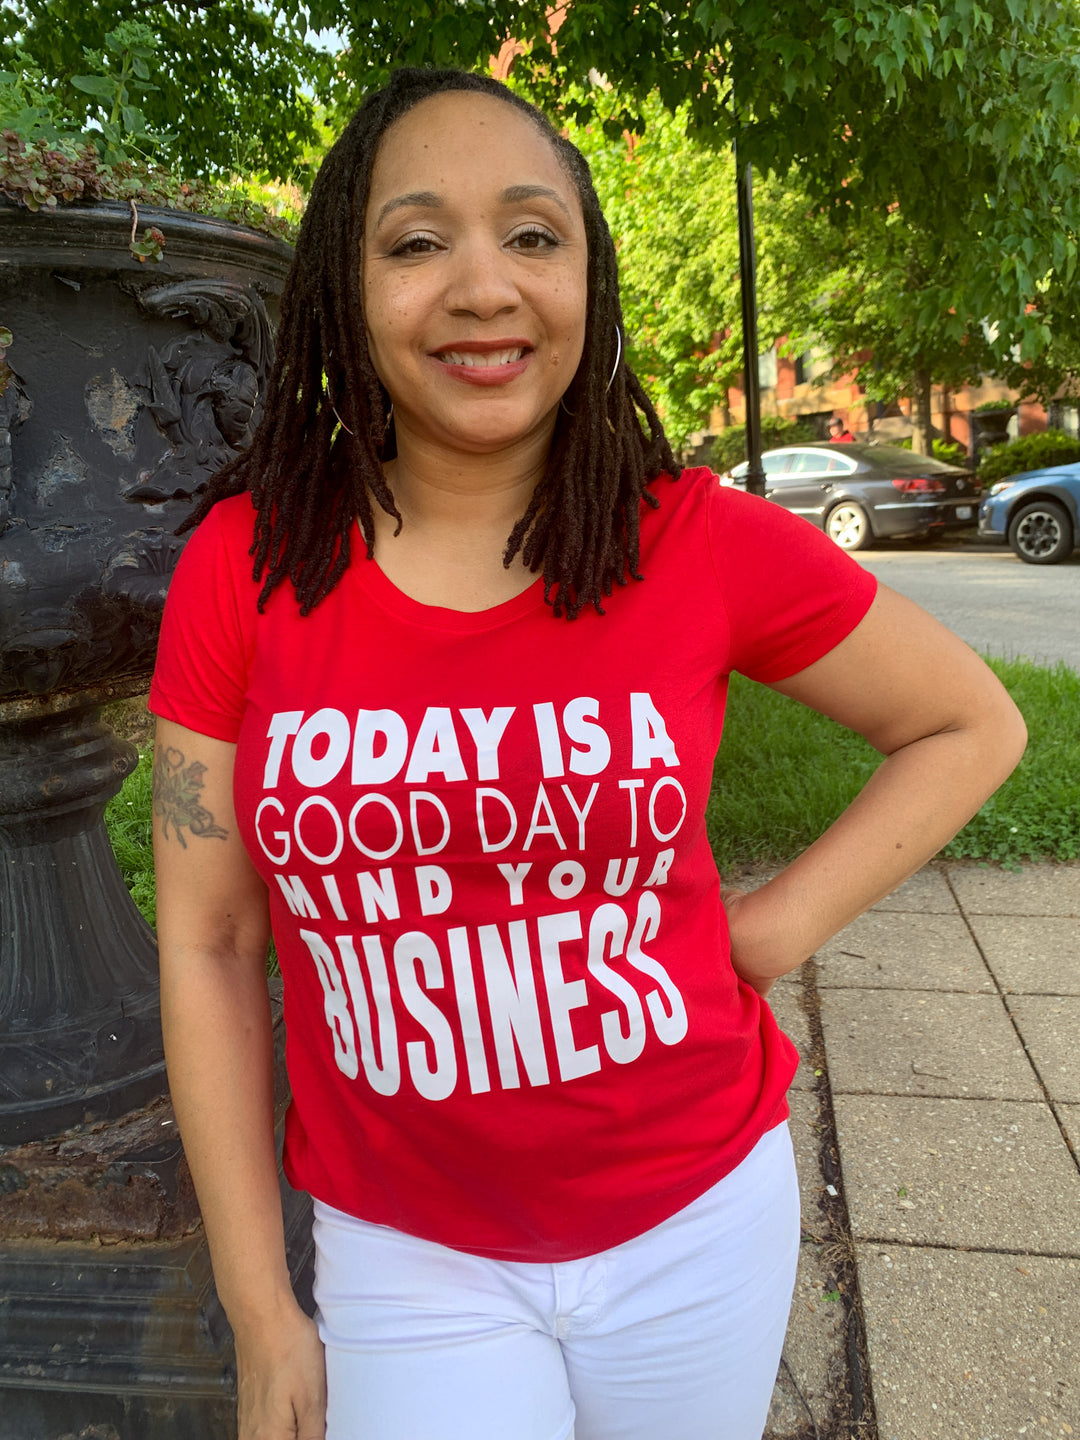 Today is a Good Day to Mind Your Business Tee